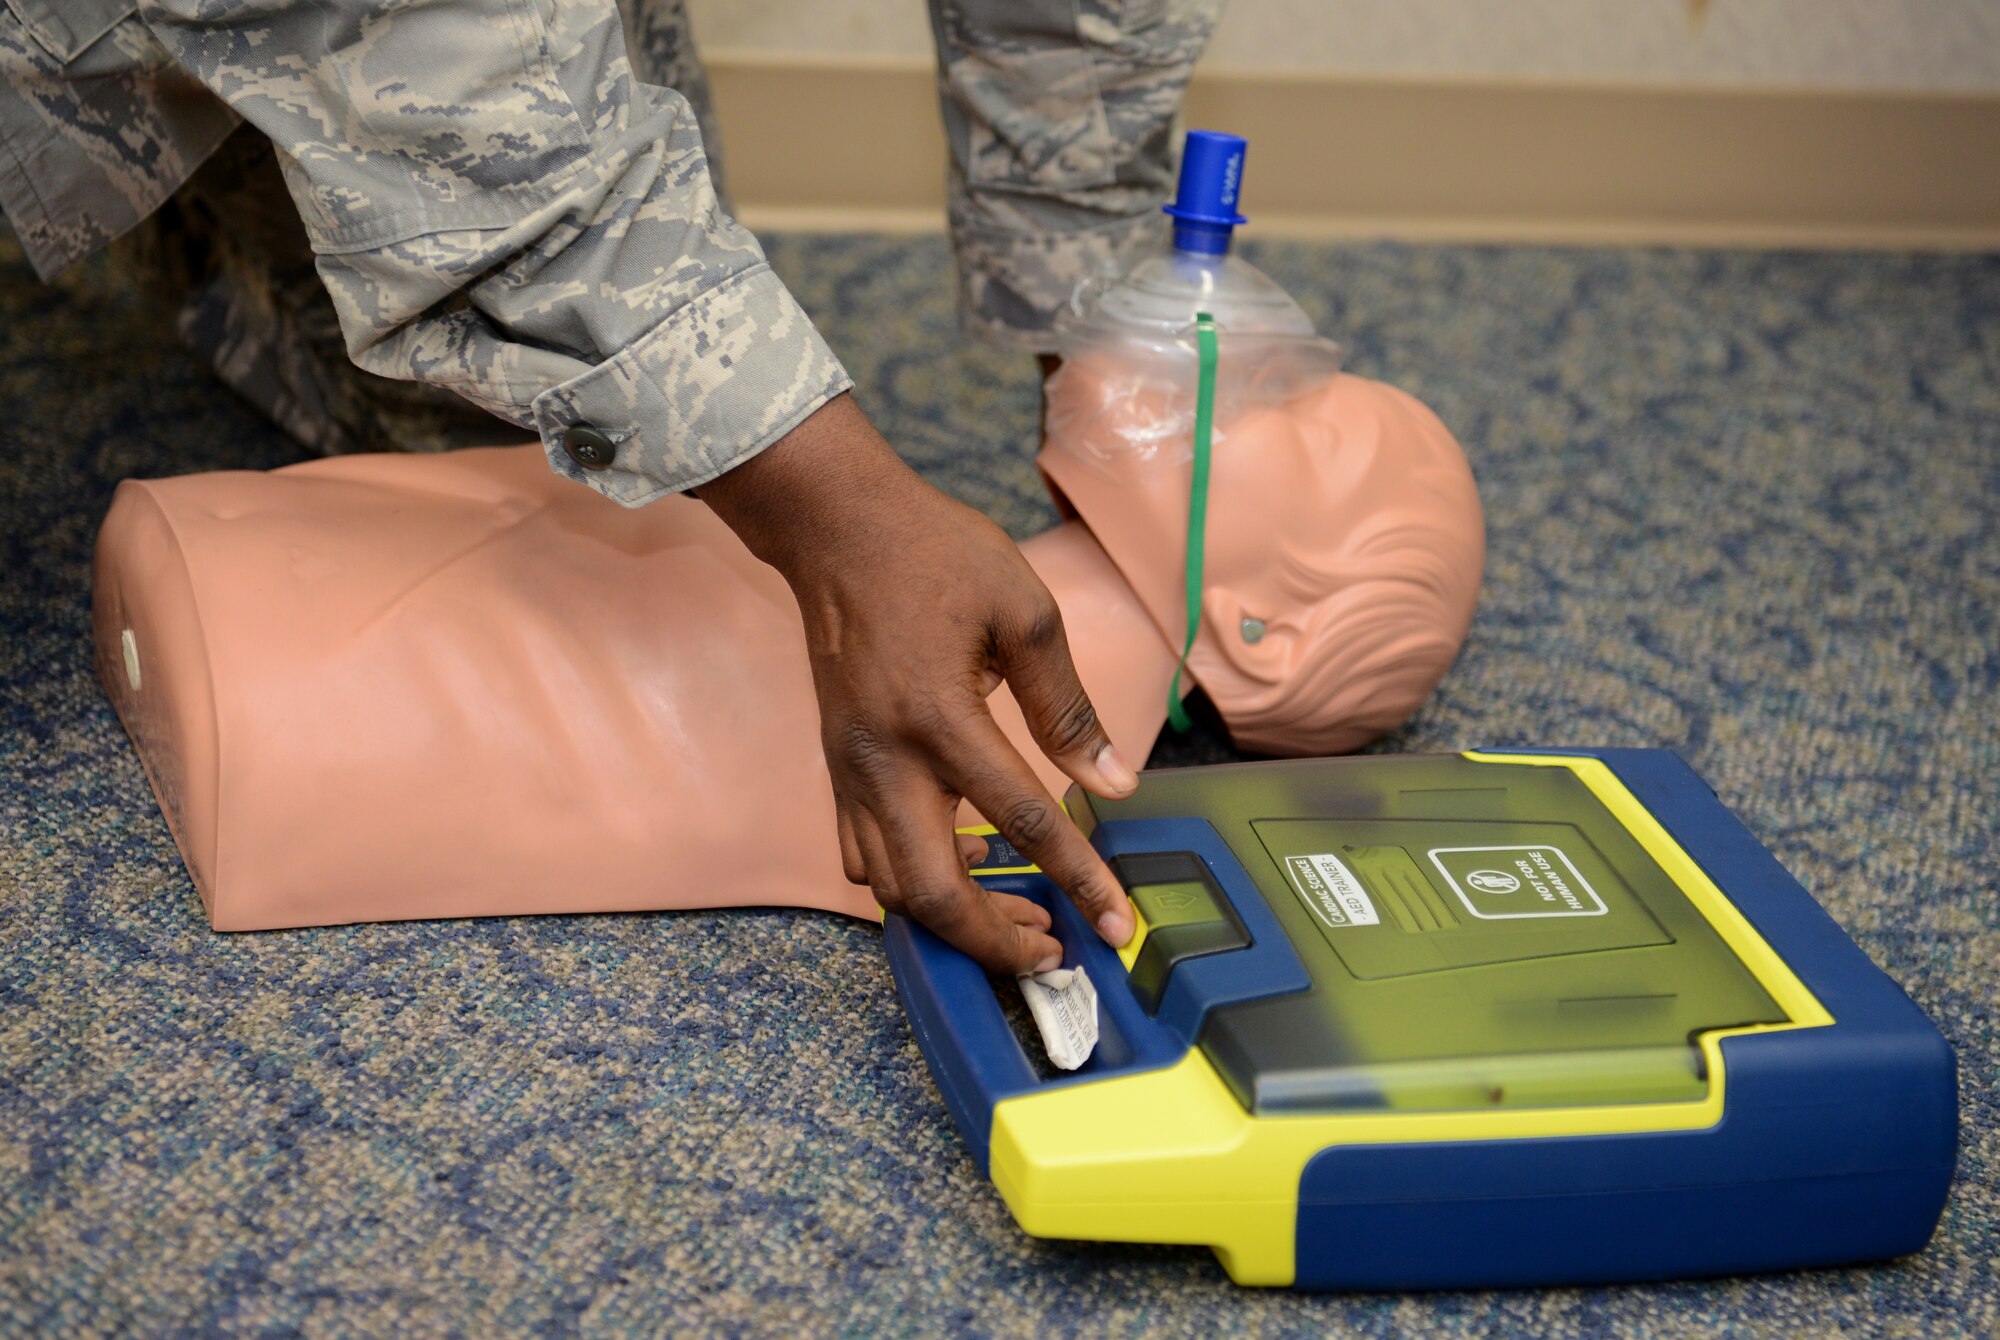 Airman 1st Class Stephen Haynes, 36th CPTS Financial Management Flight technician, practices using a defibrillator during a Heartsaver CPR training course June 12, 2015, at Andersen Air Force Base, Guam. The 36th Medical Group education and training section offers courses to provide the most accurate and up-to-date lifesaving practices for members. (U.S. Air Force photo by Airman 1st Class Arielle Vasquez/Released)